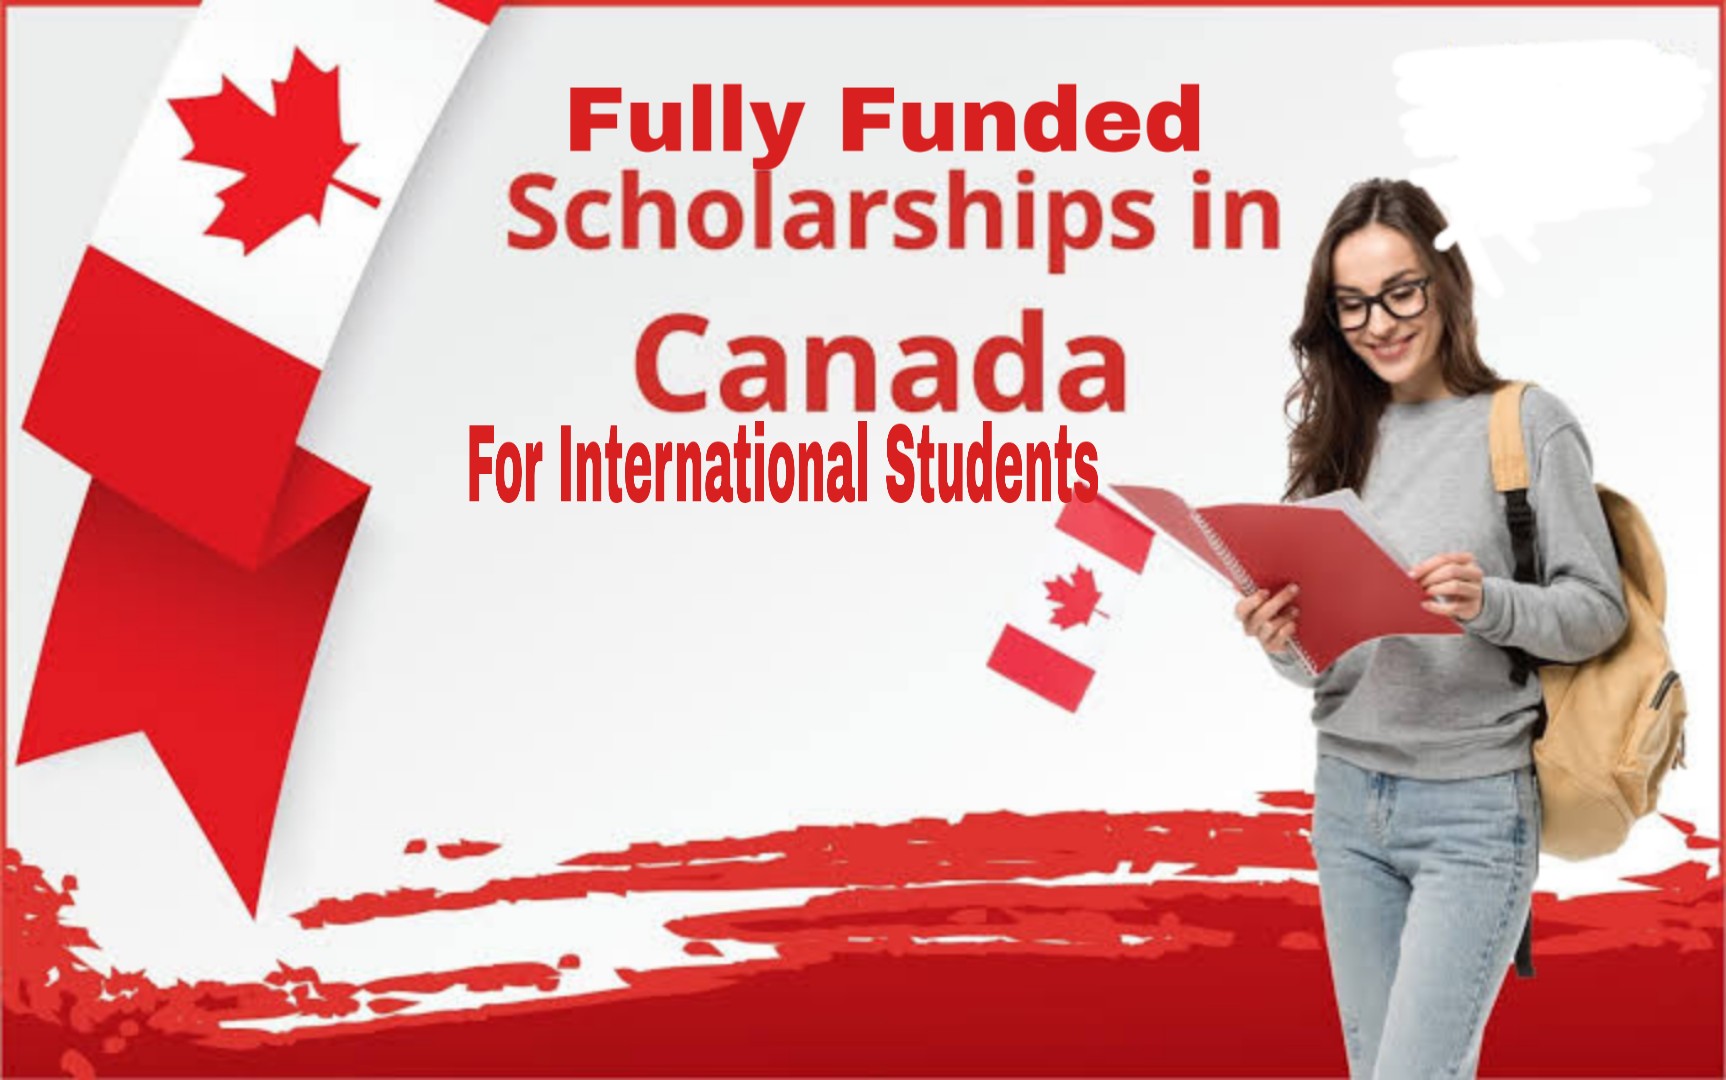 Scholarships from the Government of Canada